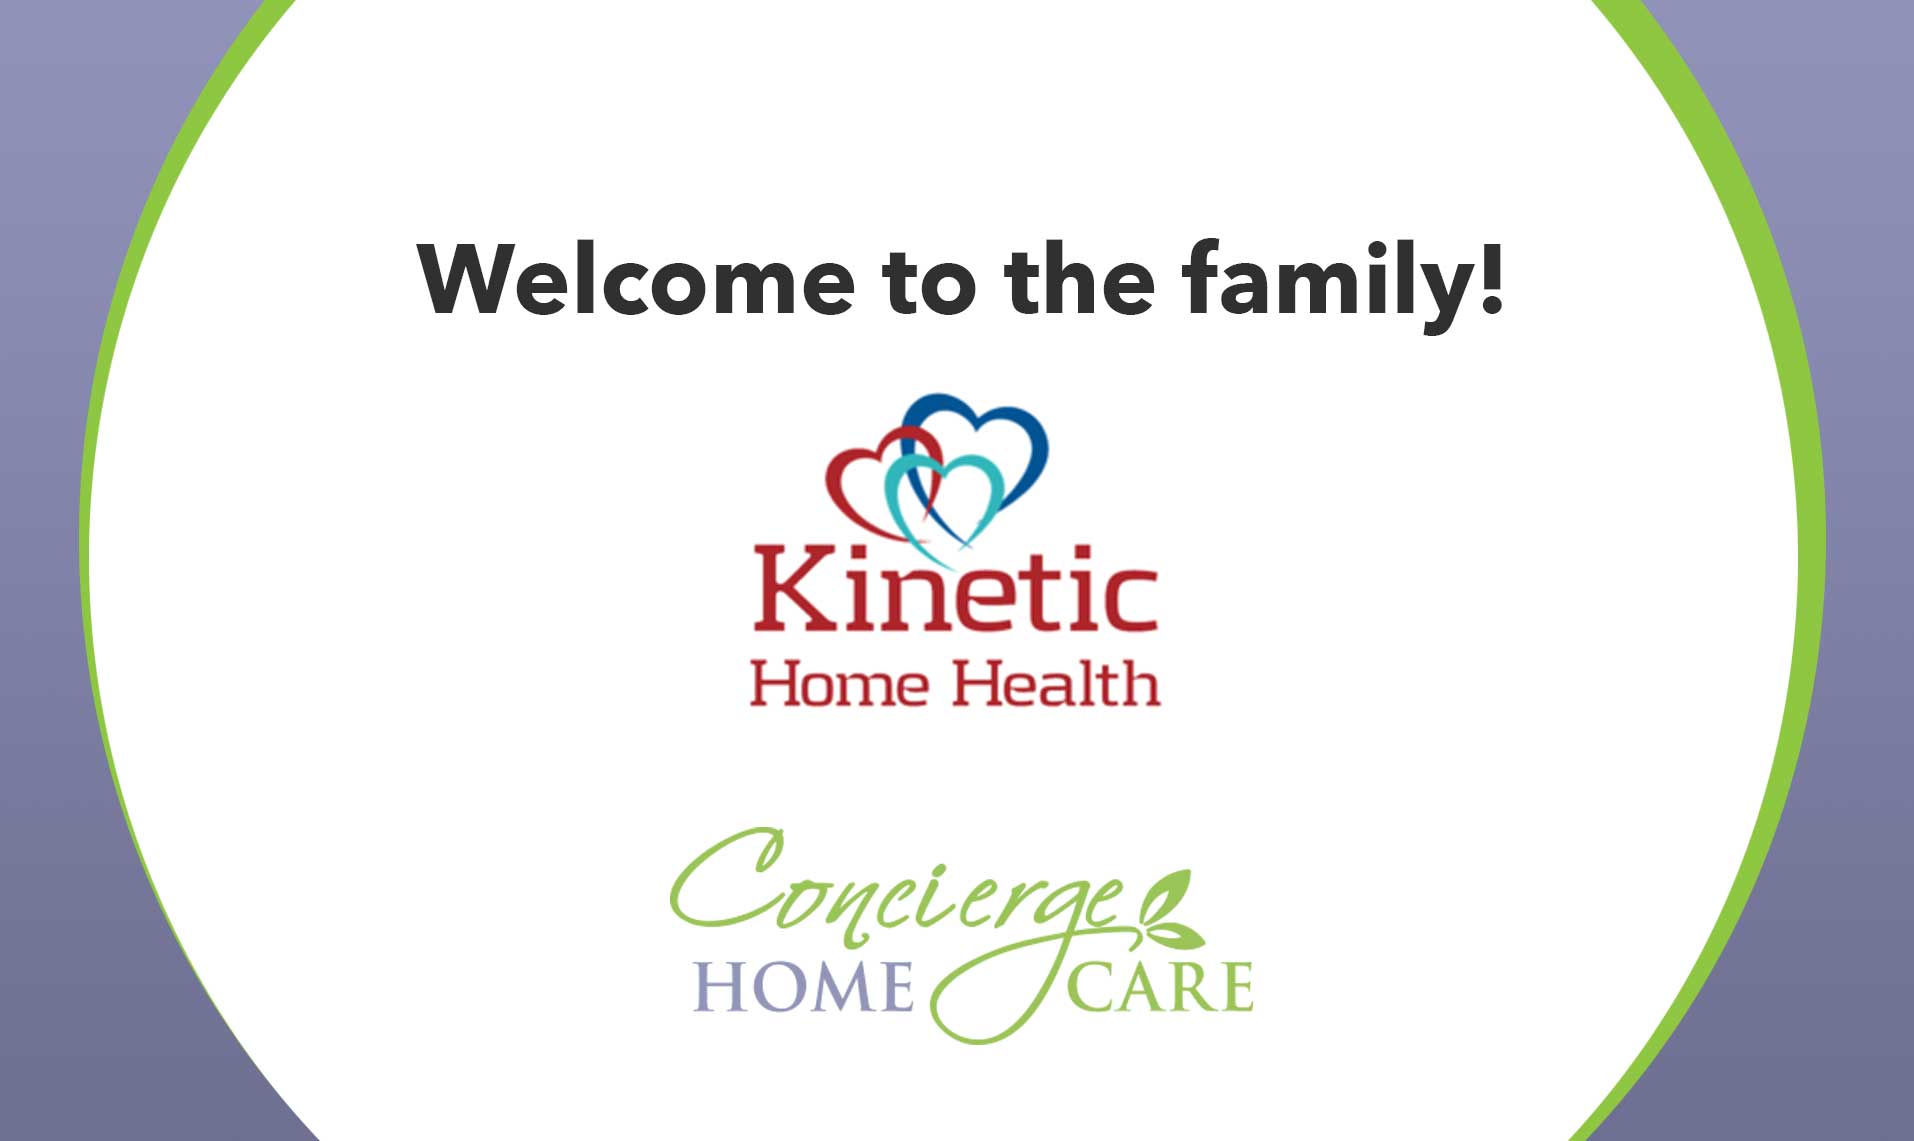 Kinetic Home Care joins Concierge Home Care